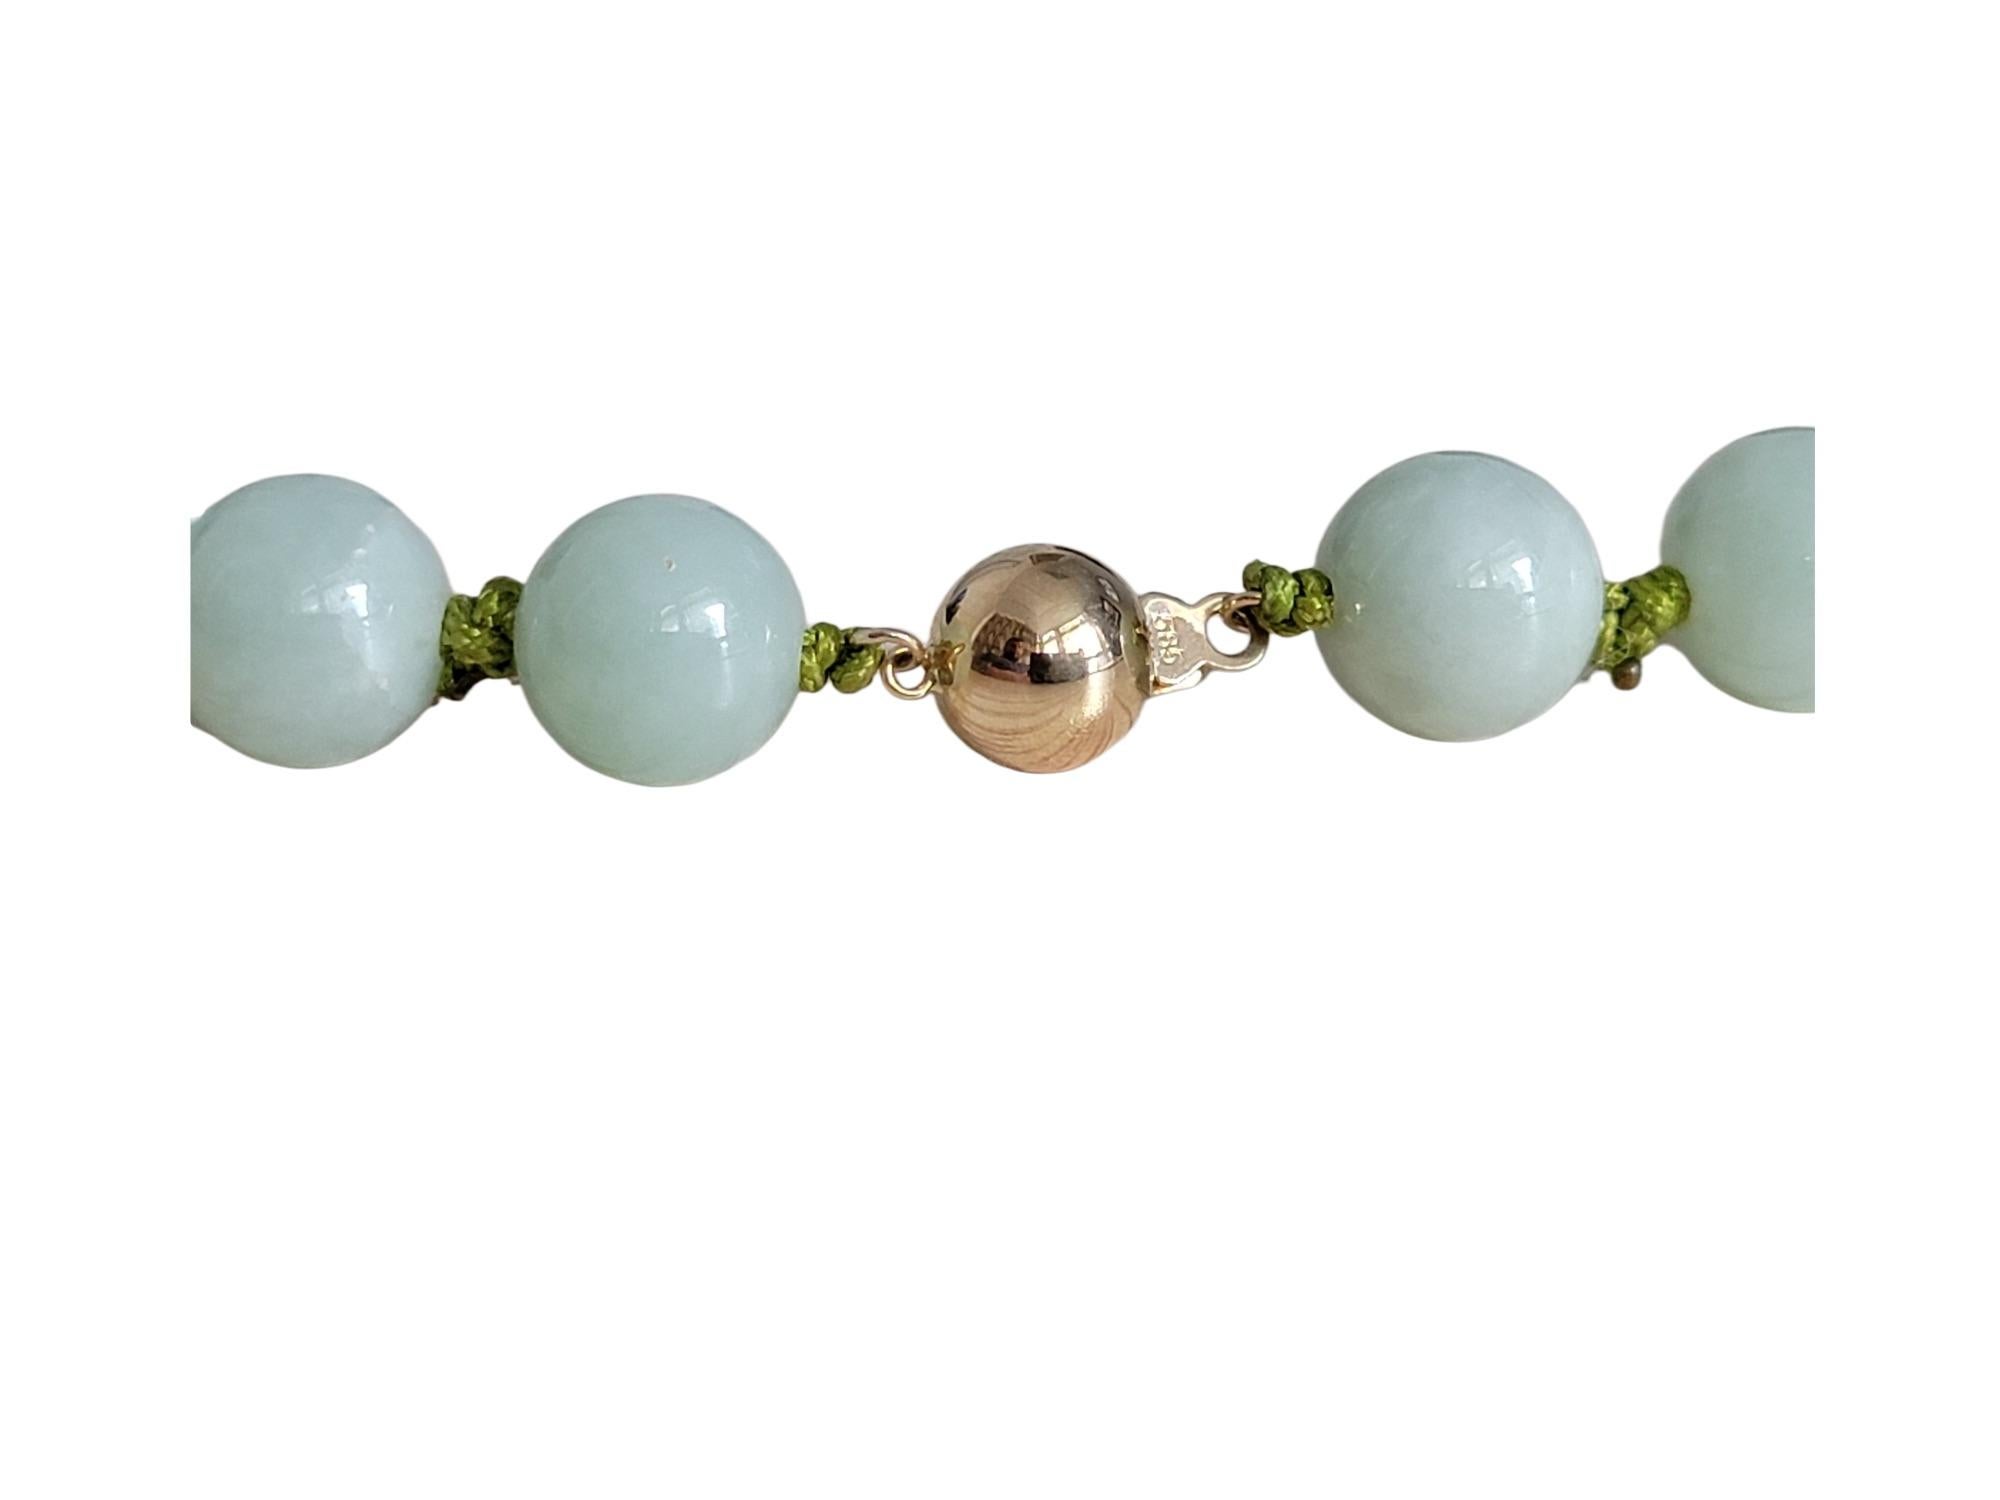 Imperial Green Burmese A-Jade Beaded Necklace (10mm Each x 42 beads) 10002

The 